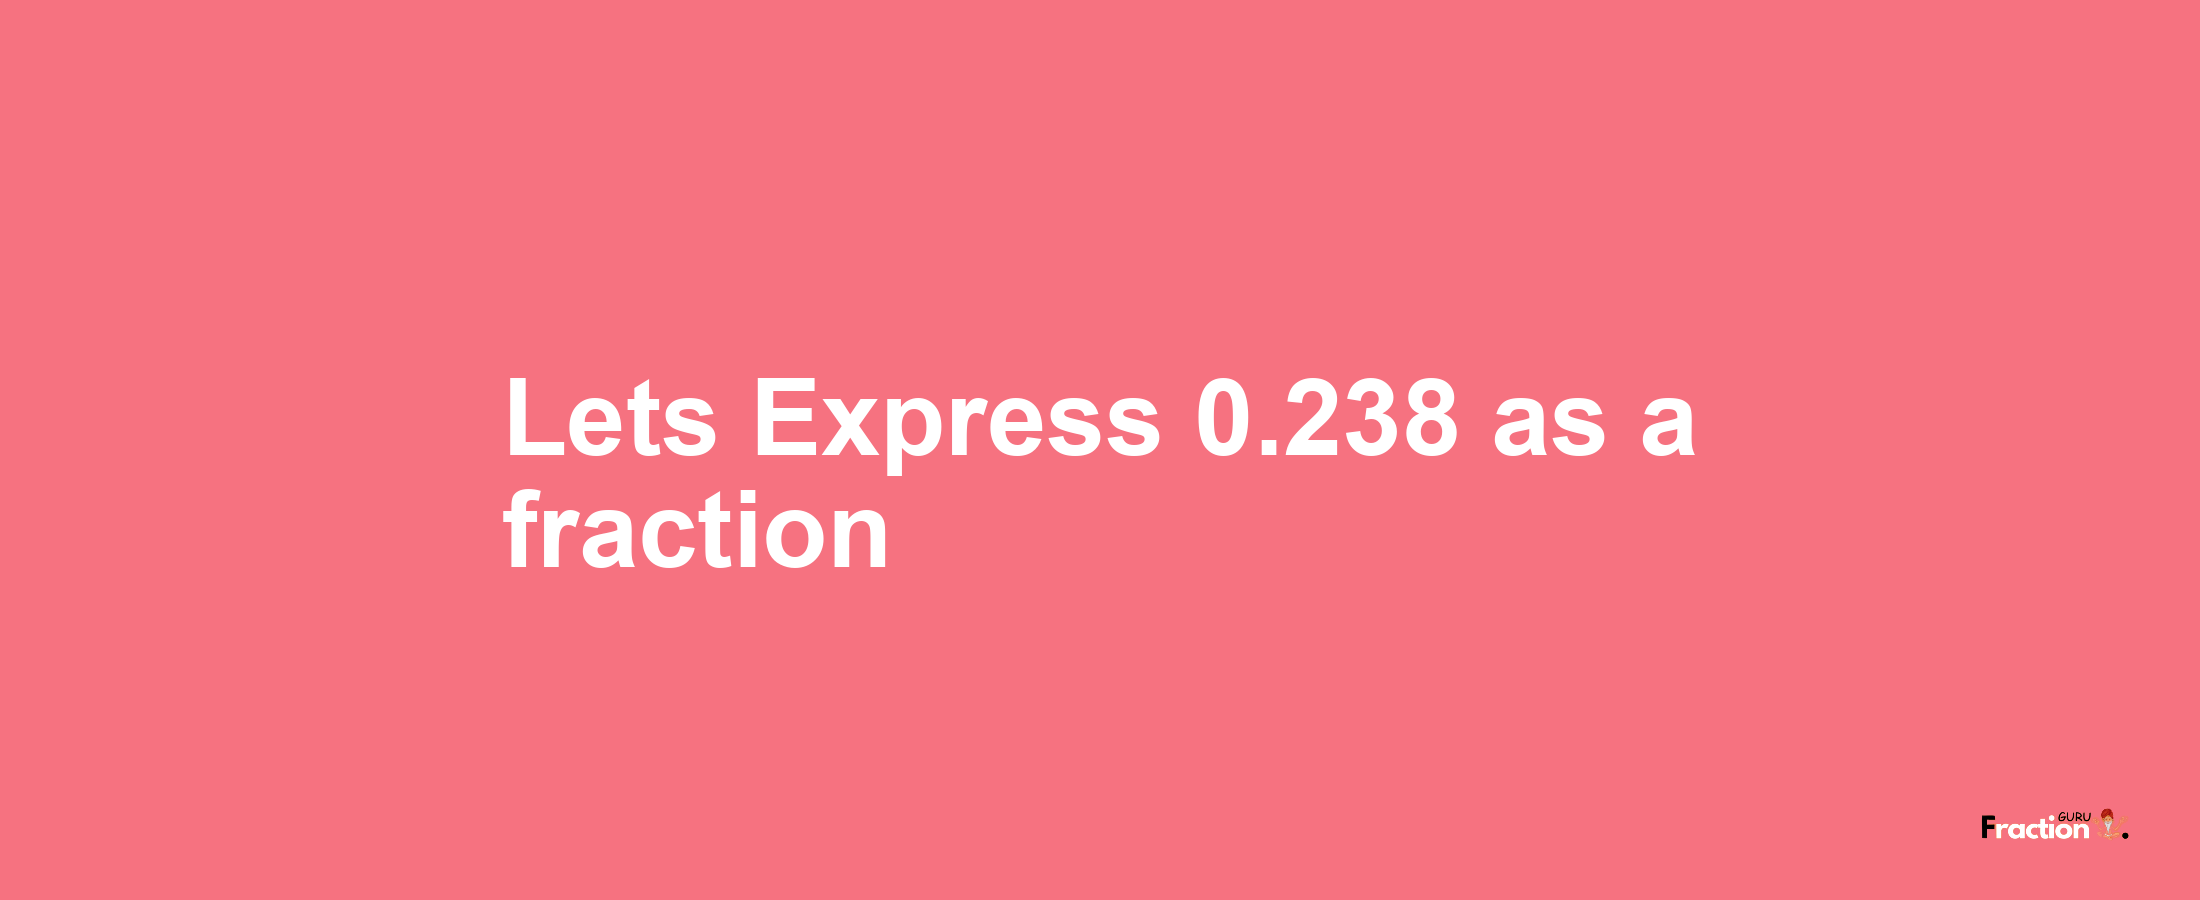 Lets Express 0.238 as afraction